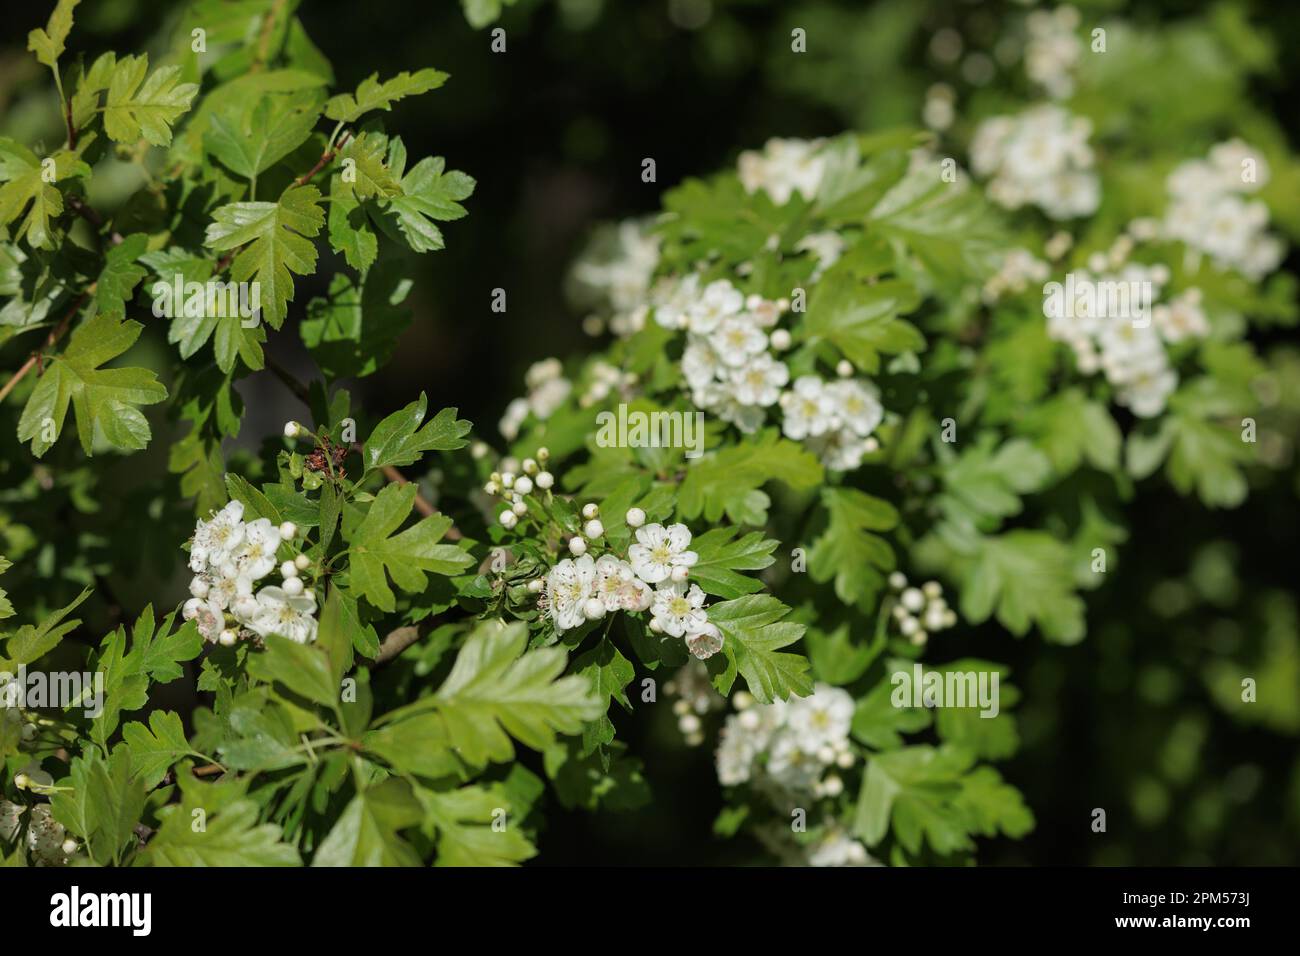 White flowers on green bushes on a summer day in the park Stock Photo